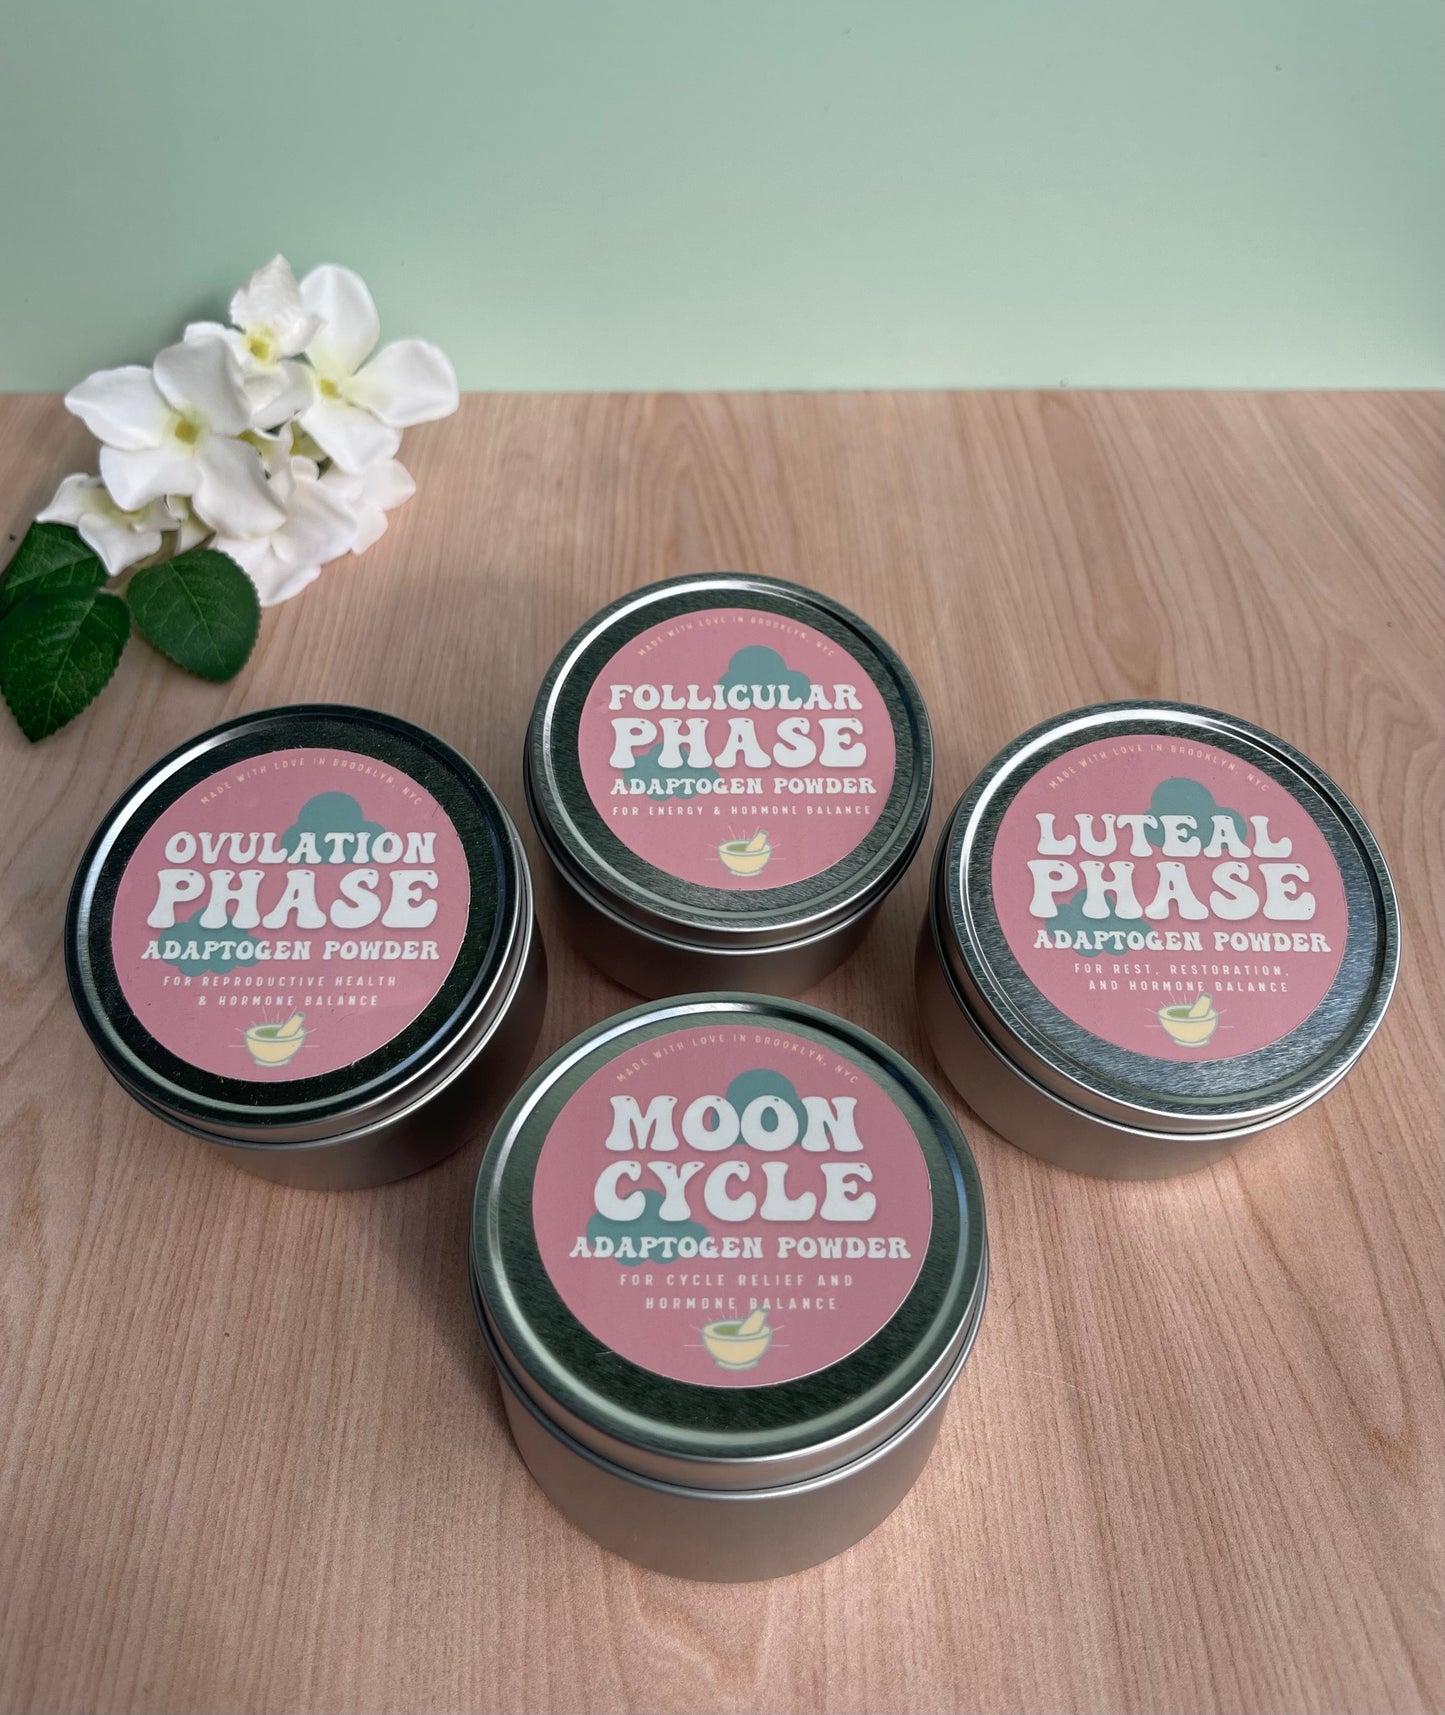 4 metal tins sitting on wood table next to flowers. One tin reads Ovulation phase, one tin reads Follicular phase, one tin reads luteal phase, one tin reads moon cycle